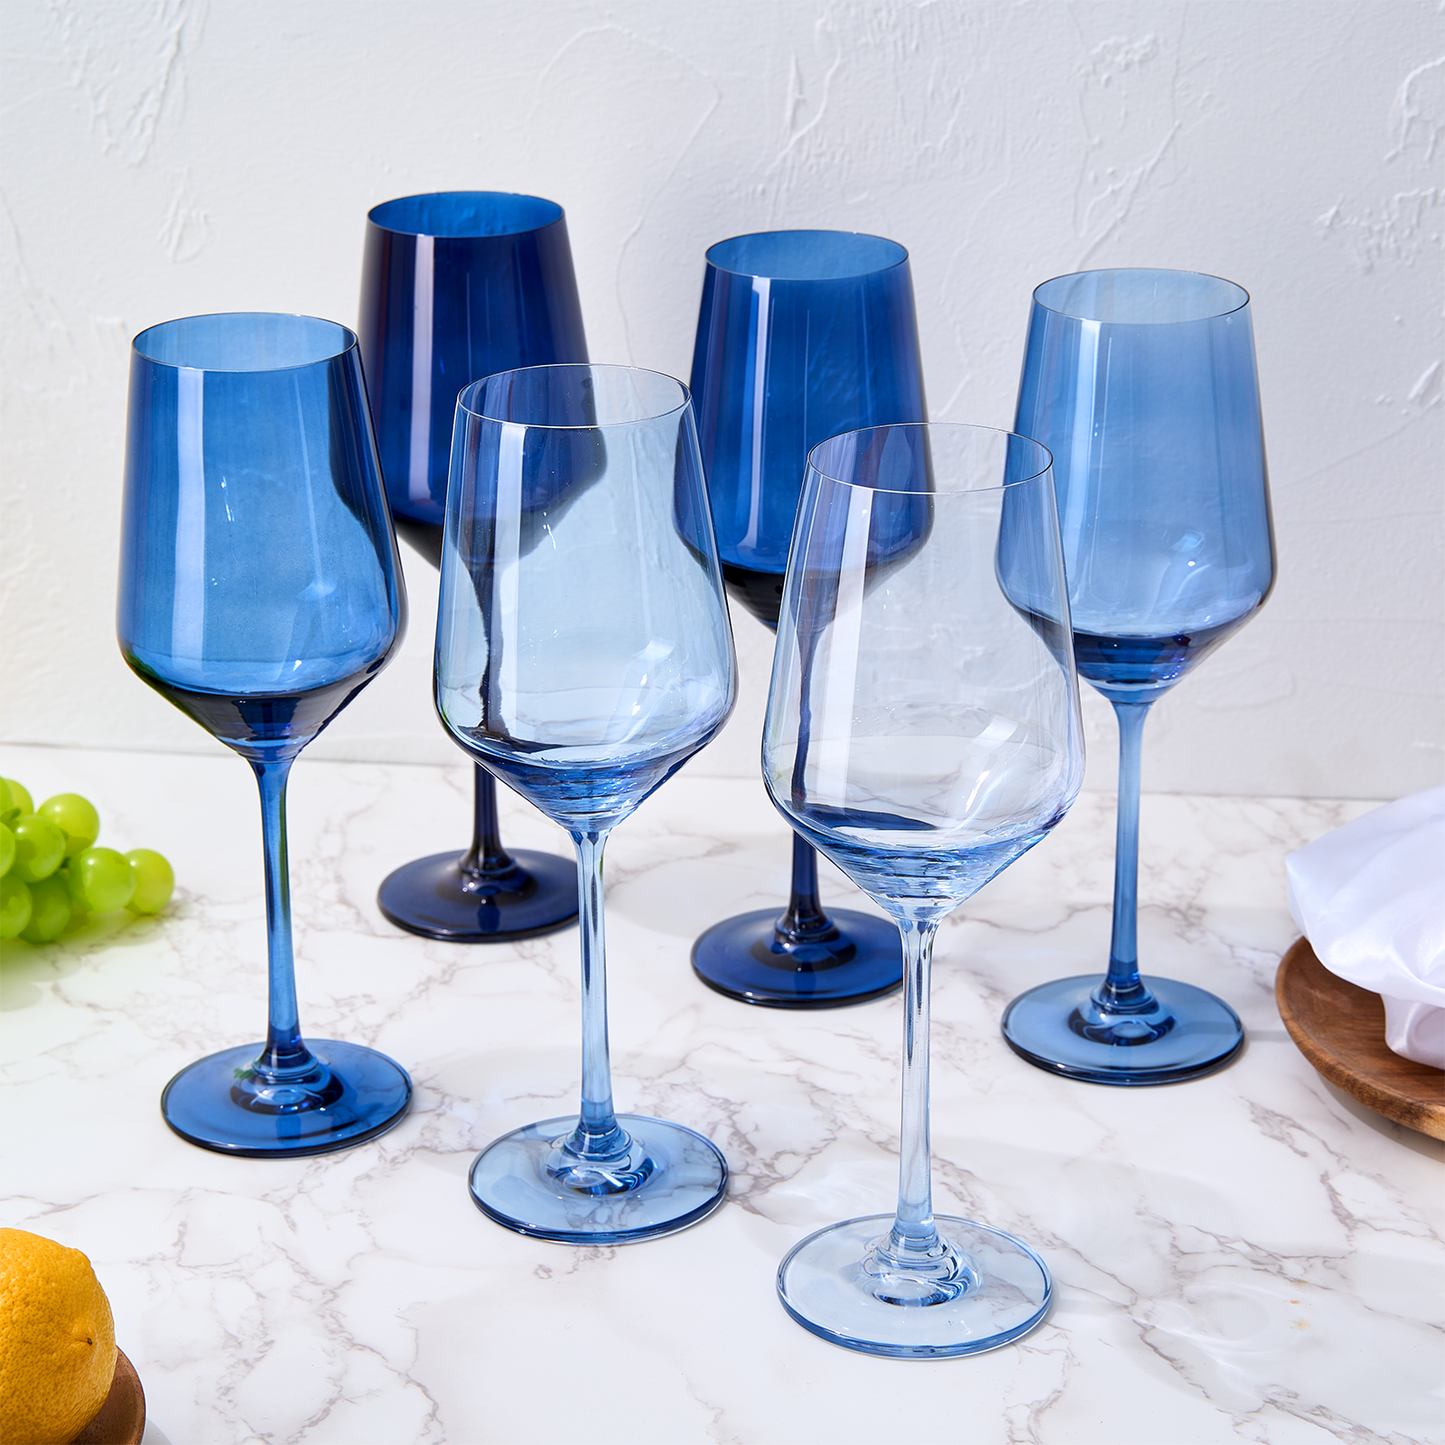 Colored Wine Glass Set, 12oz Glasses Set of 6 For All Occasions & Special Celebrations Gift For Him, Her, Wife, Friend Drinkware Unique Style Tall Stemmed for White & Red Wine Elegant Glassware (Blue)-1